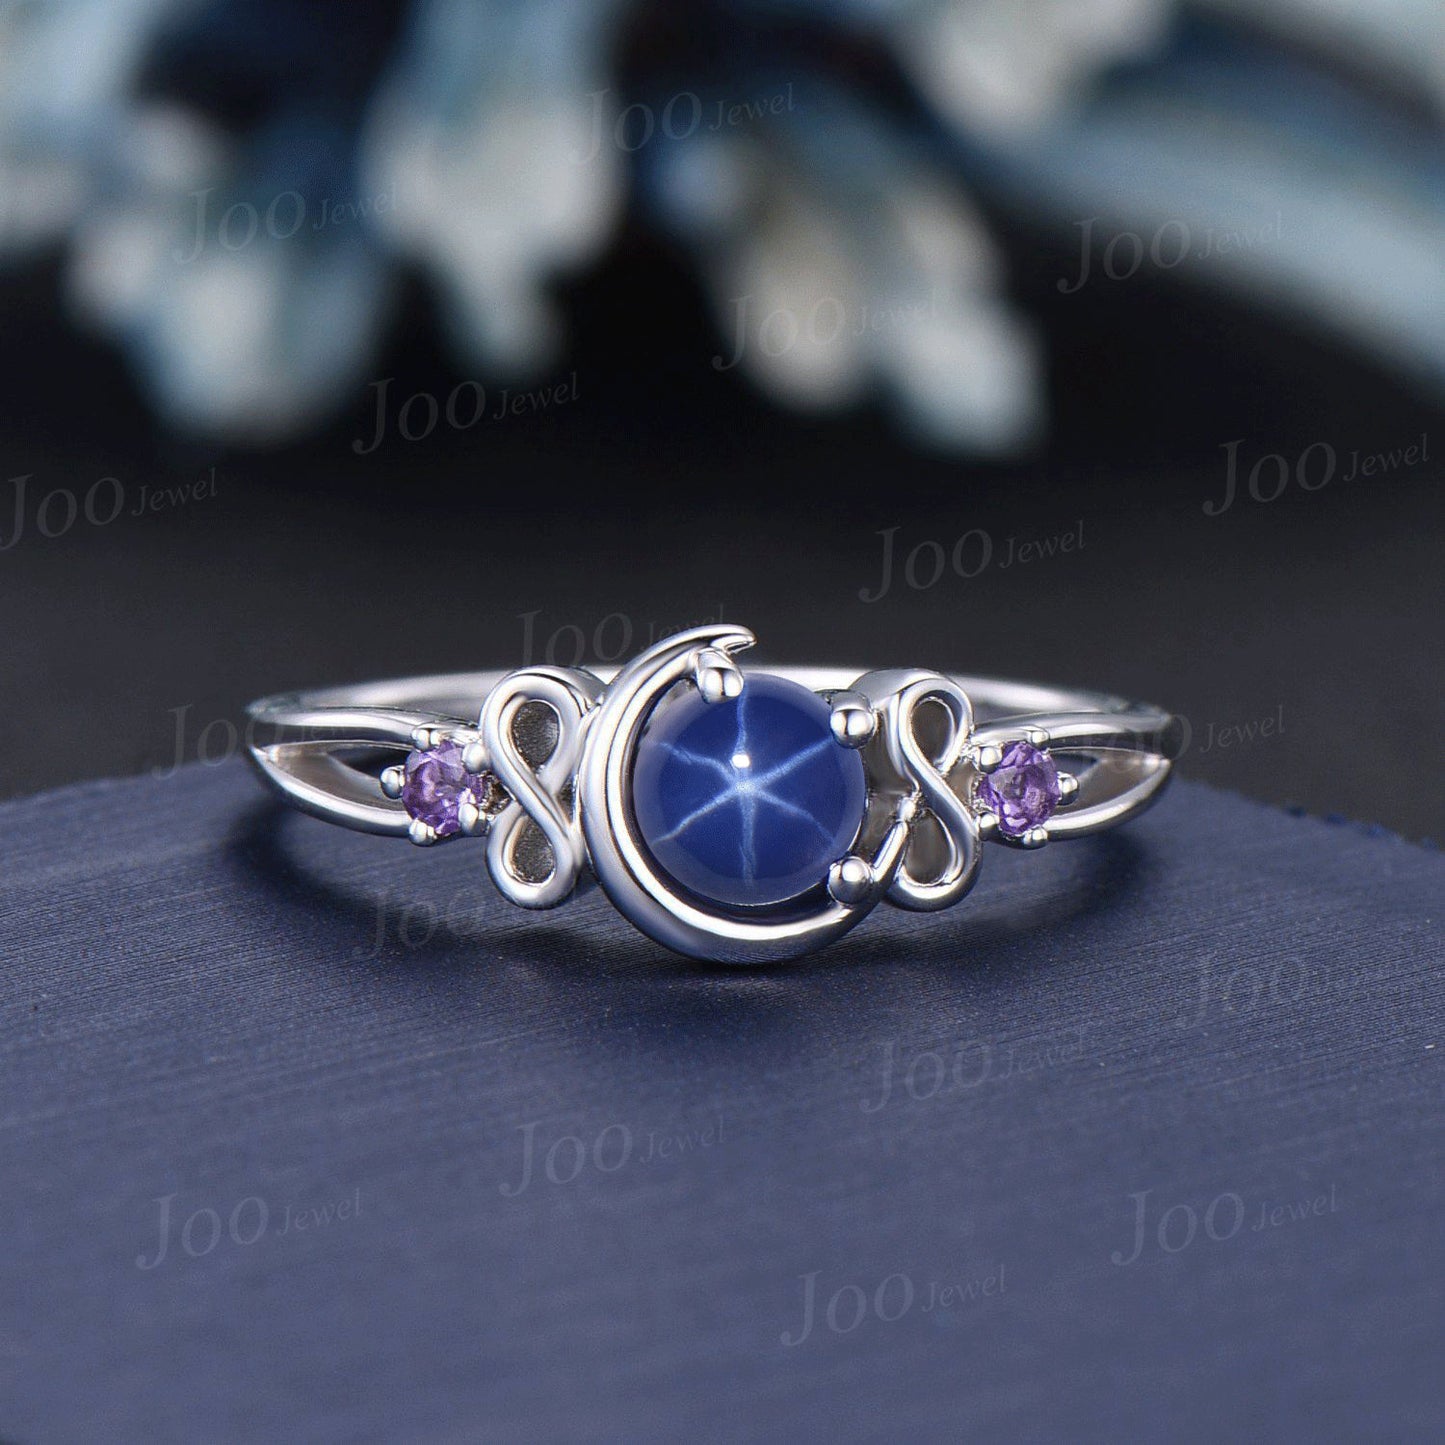 5mm Round Star Sapphire Moon Engagement Ring Amethyst Infinity Wedding Ring Split Shank Band Unique Personalized Anniversary/Promise Ring